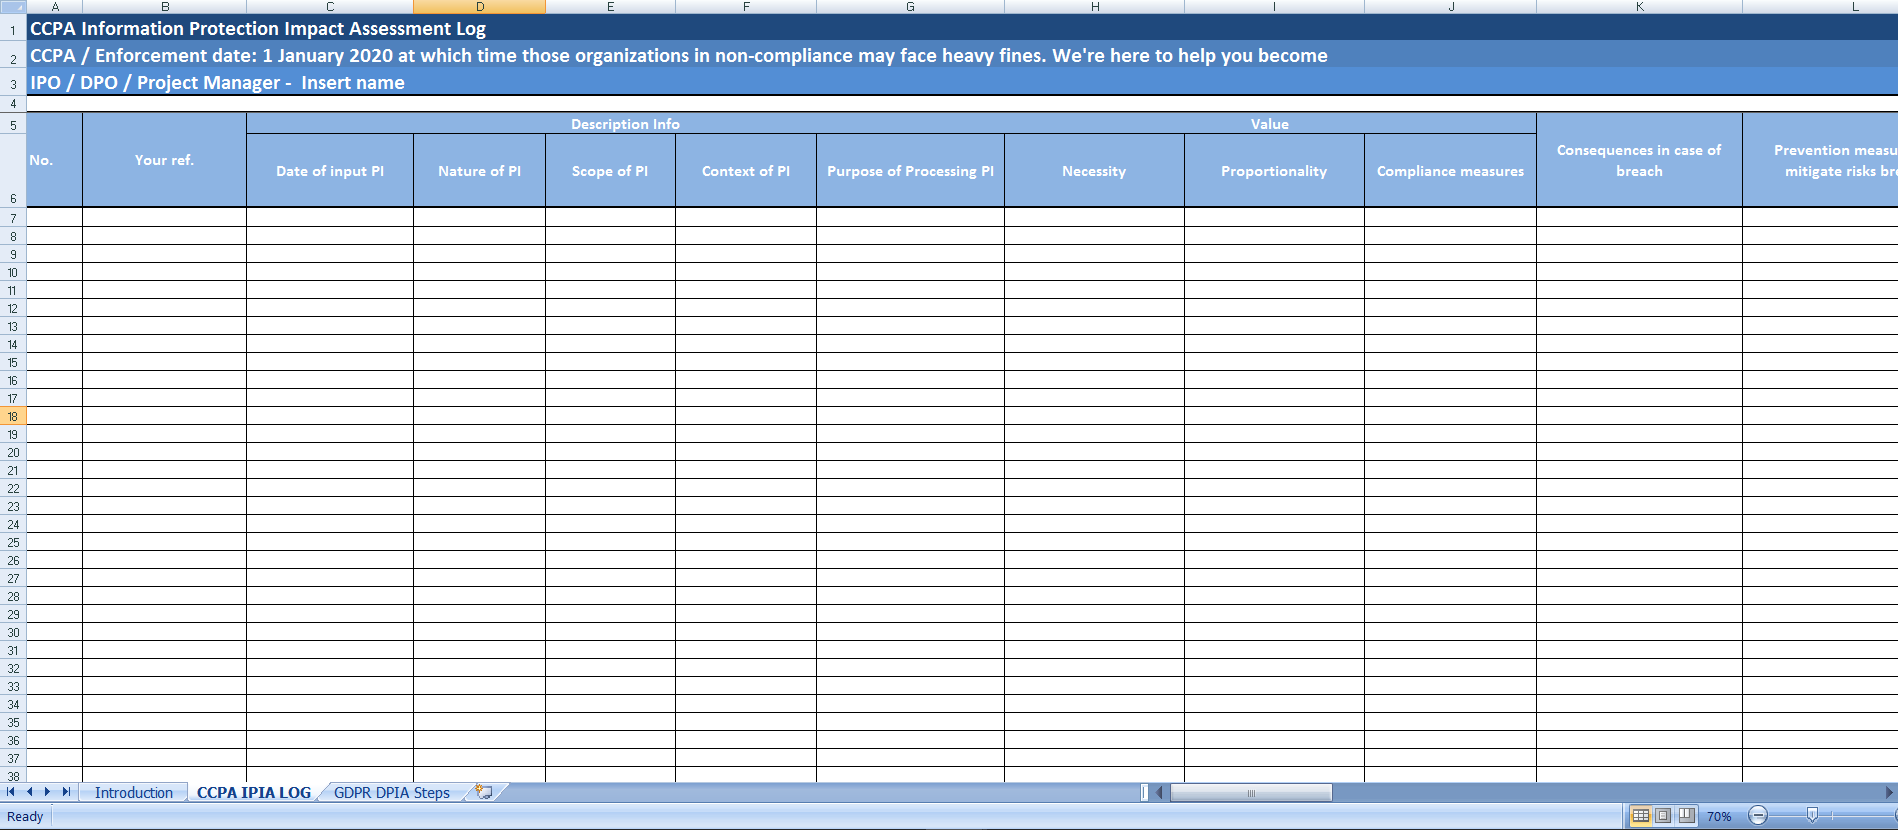 ccpa information protection impact assessment log template